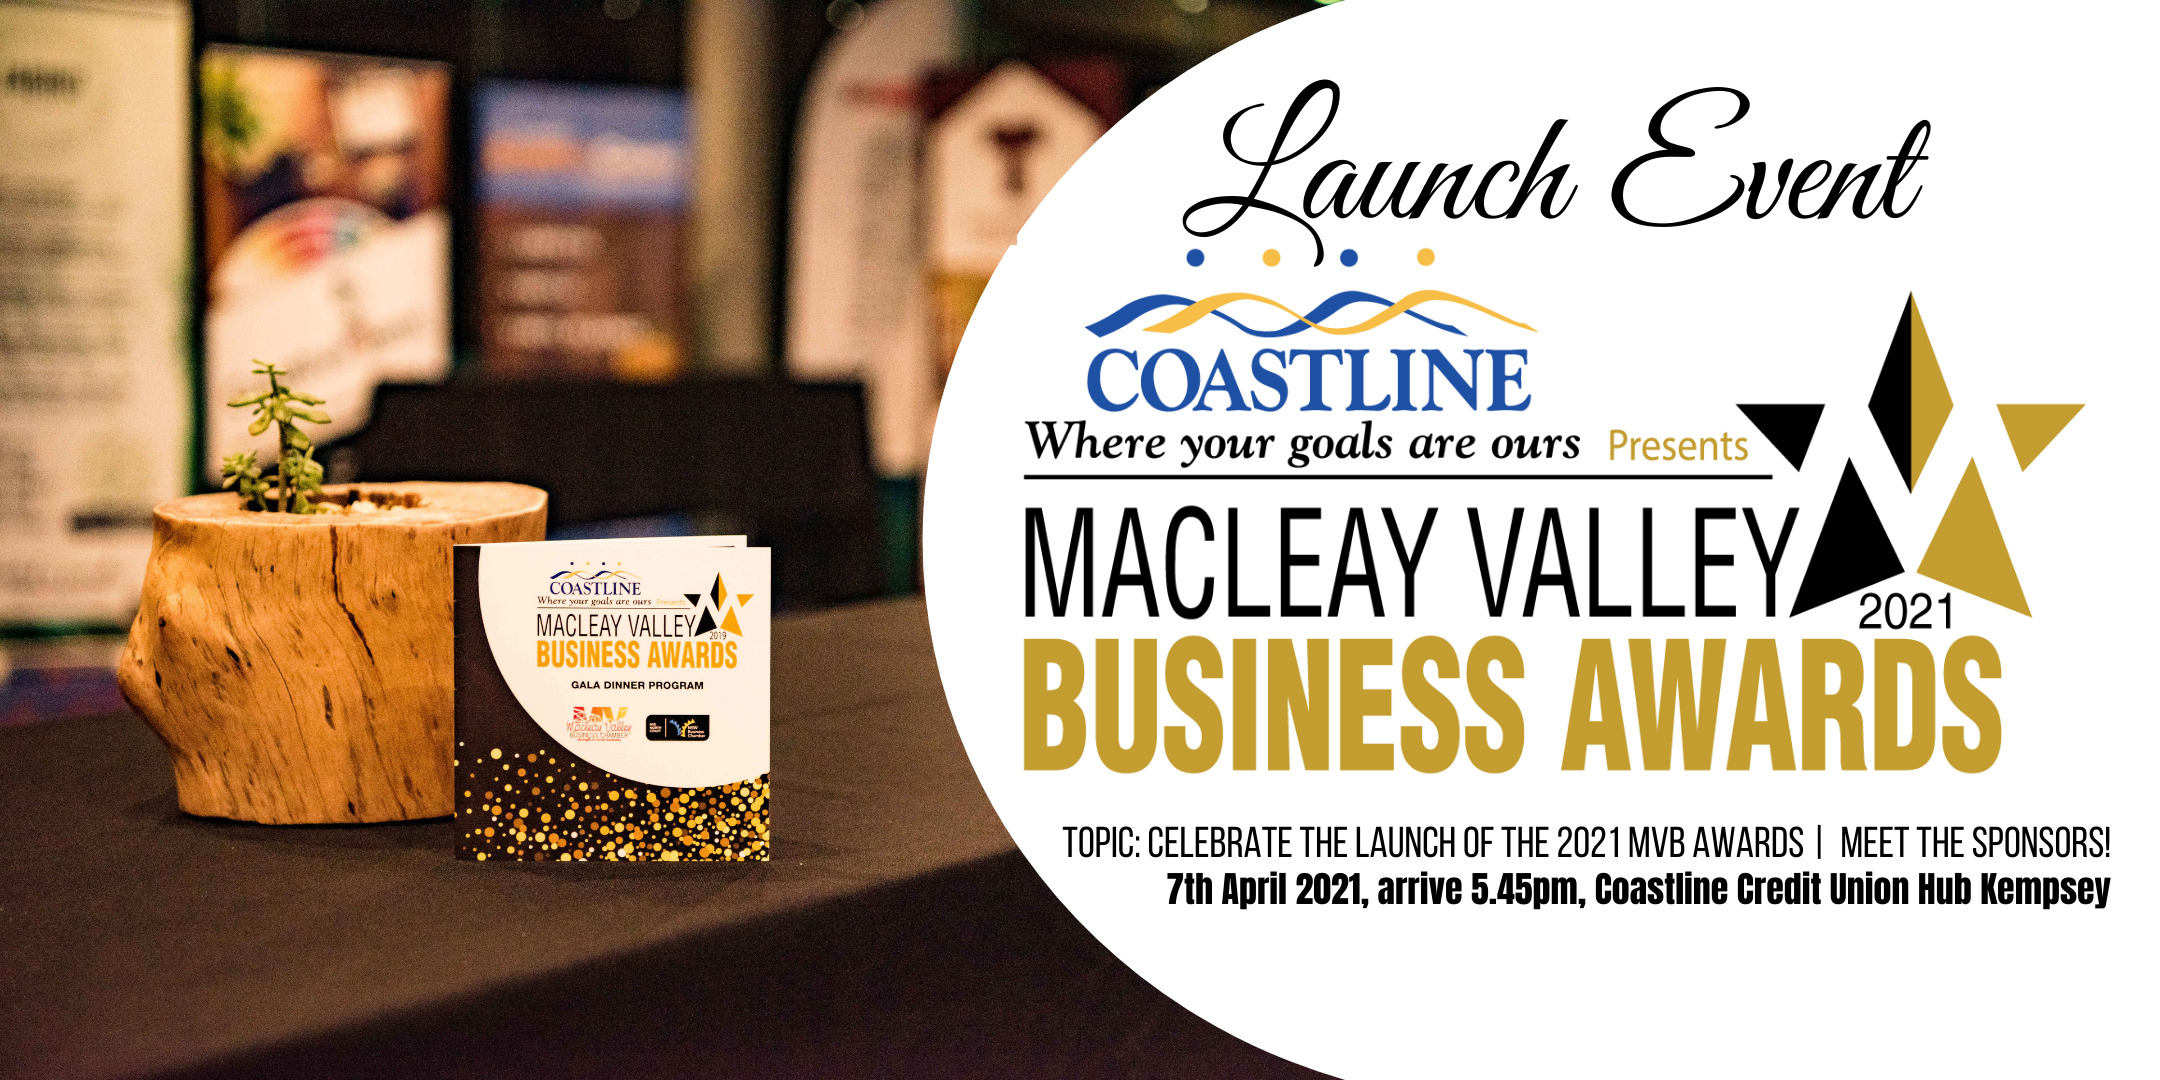 2021 Macleay Valley Business Awards Launch Event, 7th April 2021